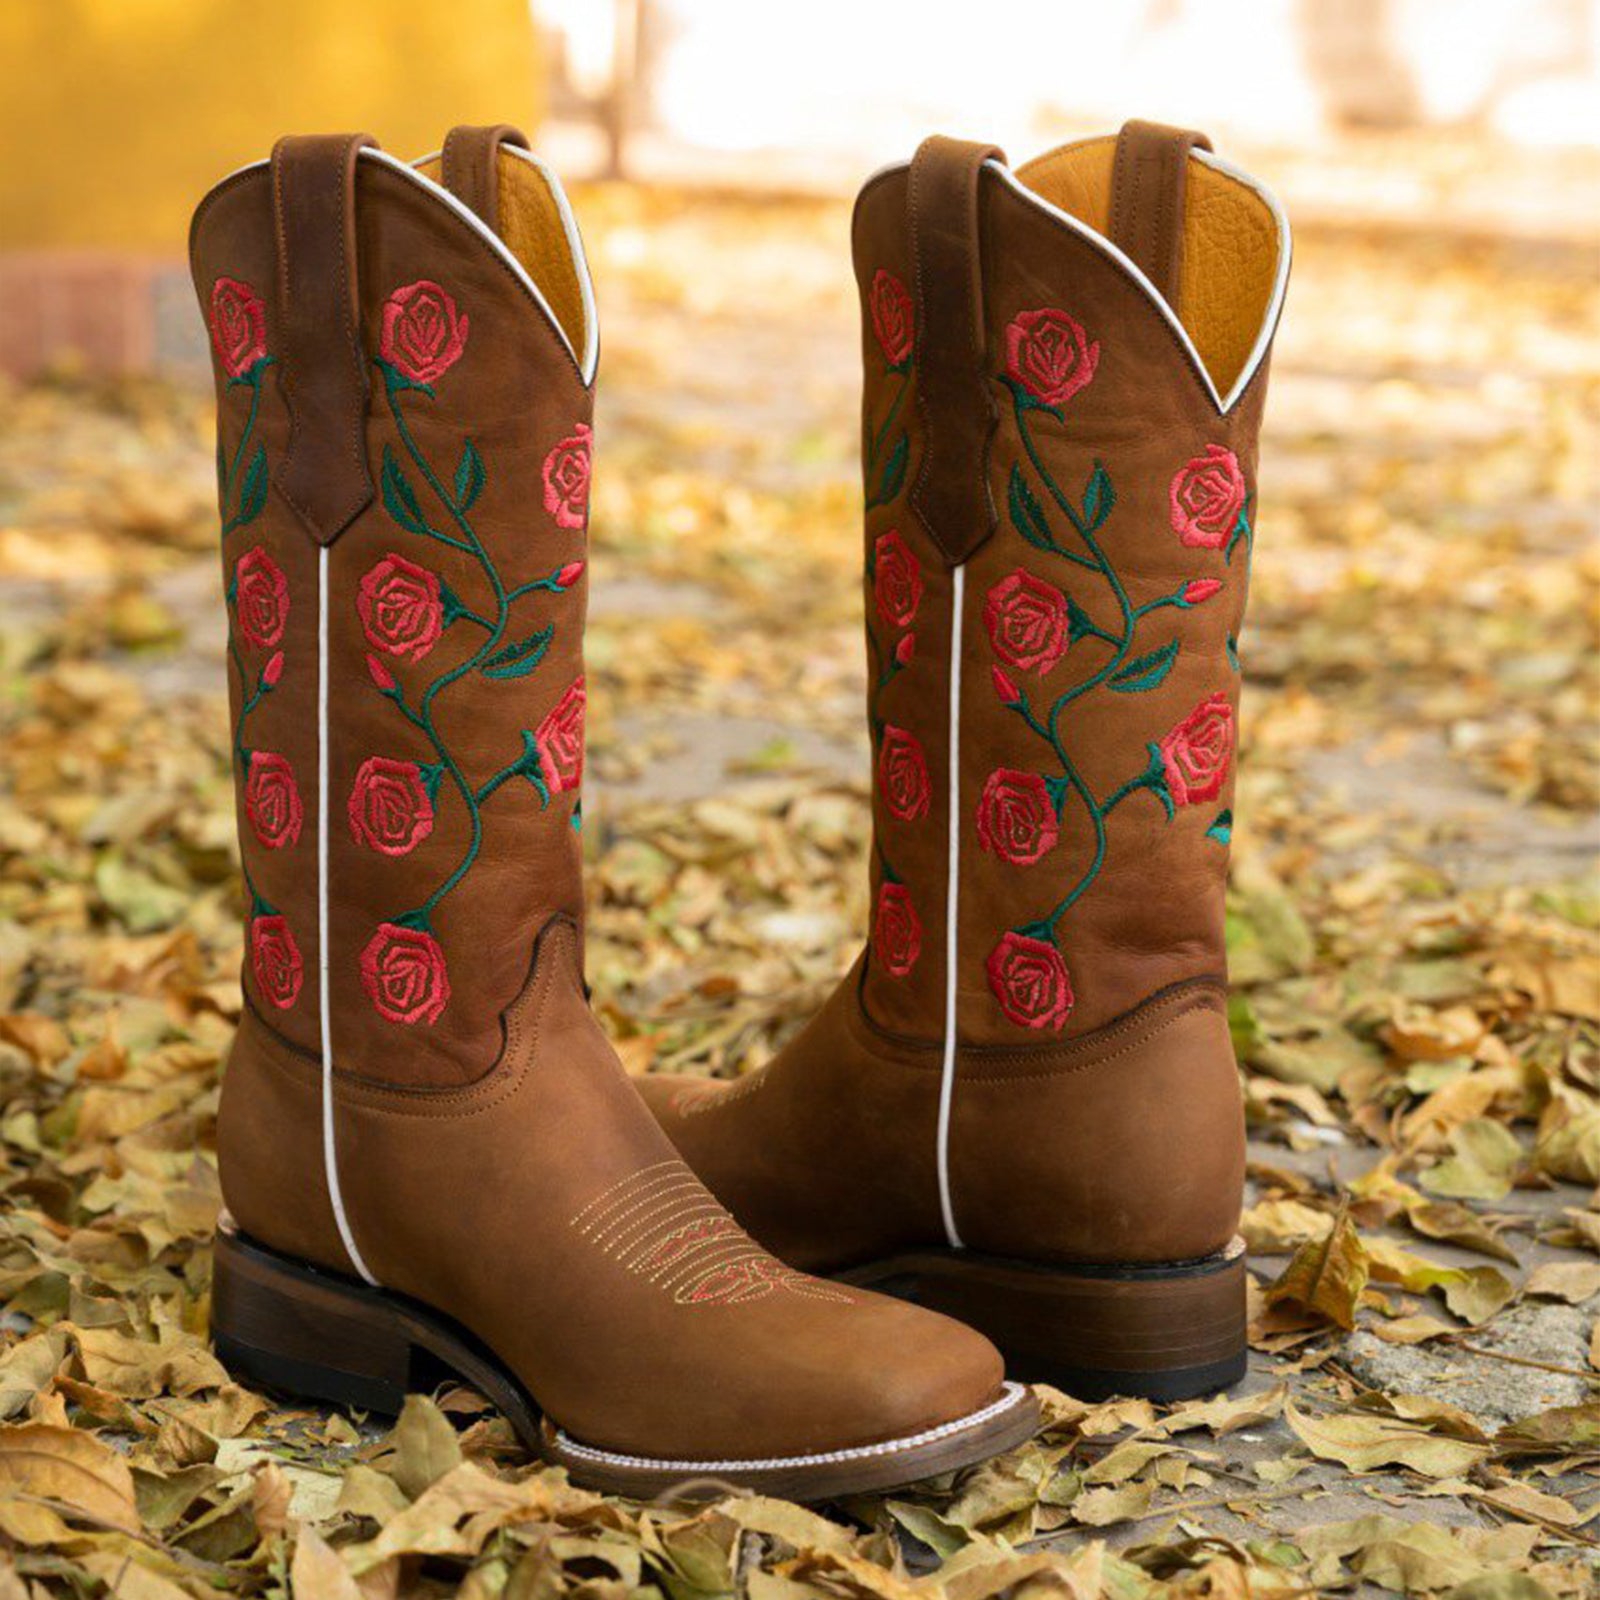 Image of Abolengo Red Rose Square Toe Cowgirl Boots outside.